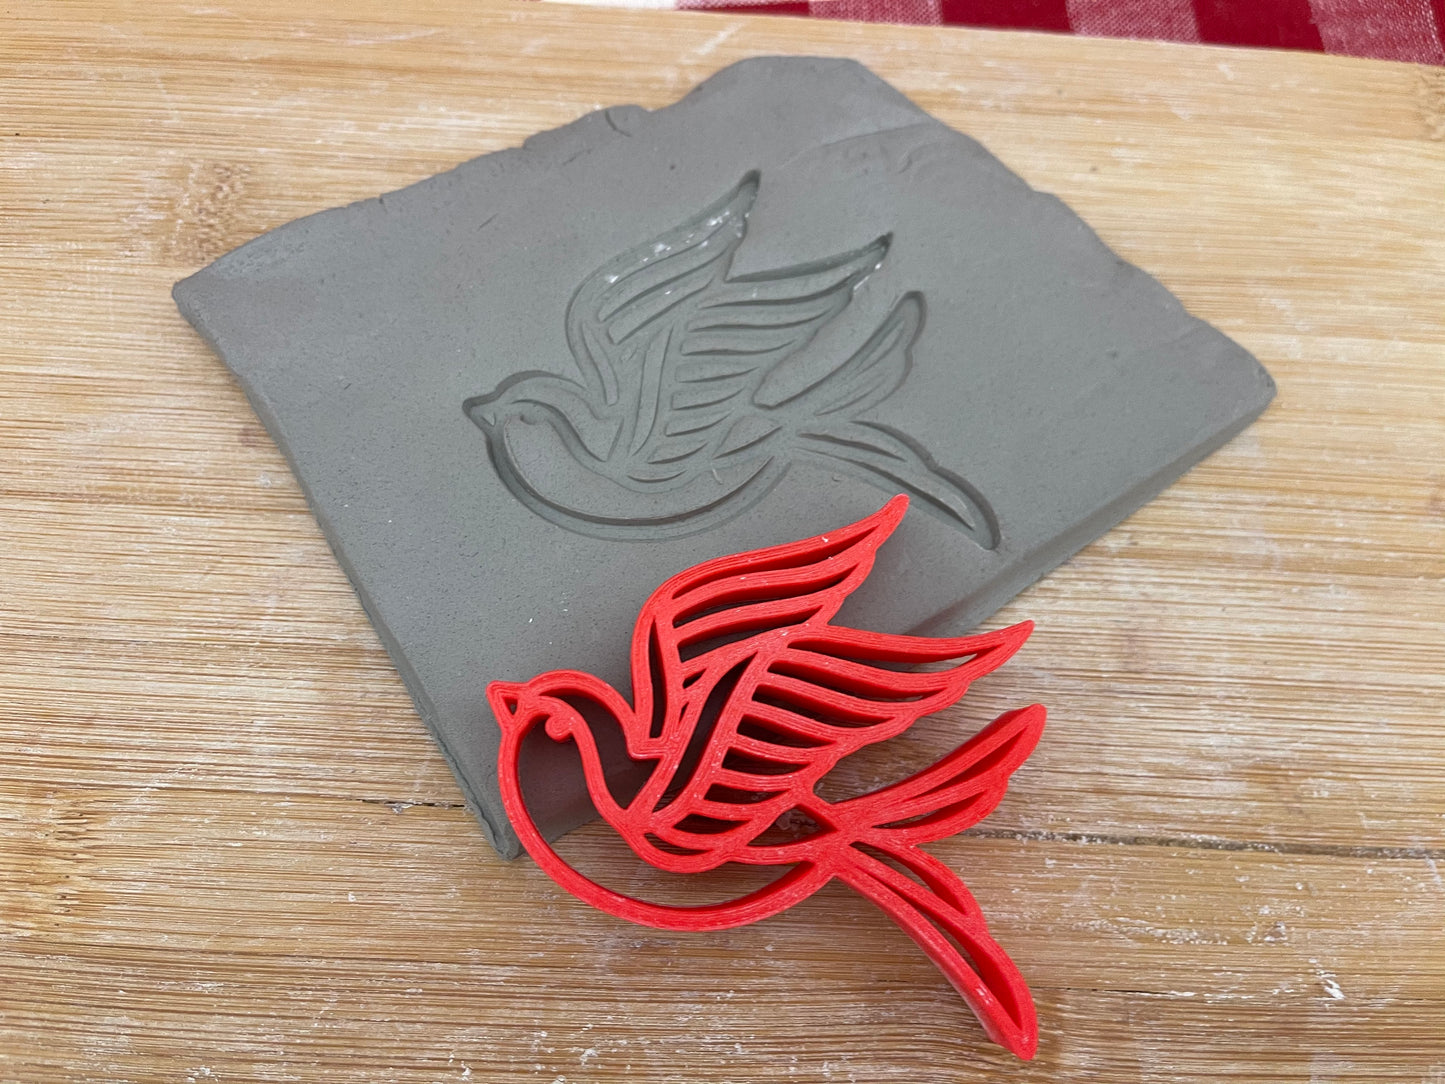 Bird Pottery Stamp - Pottery Tool, plastic 3d printed, multiple sizes available